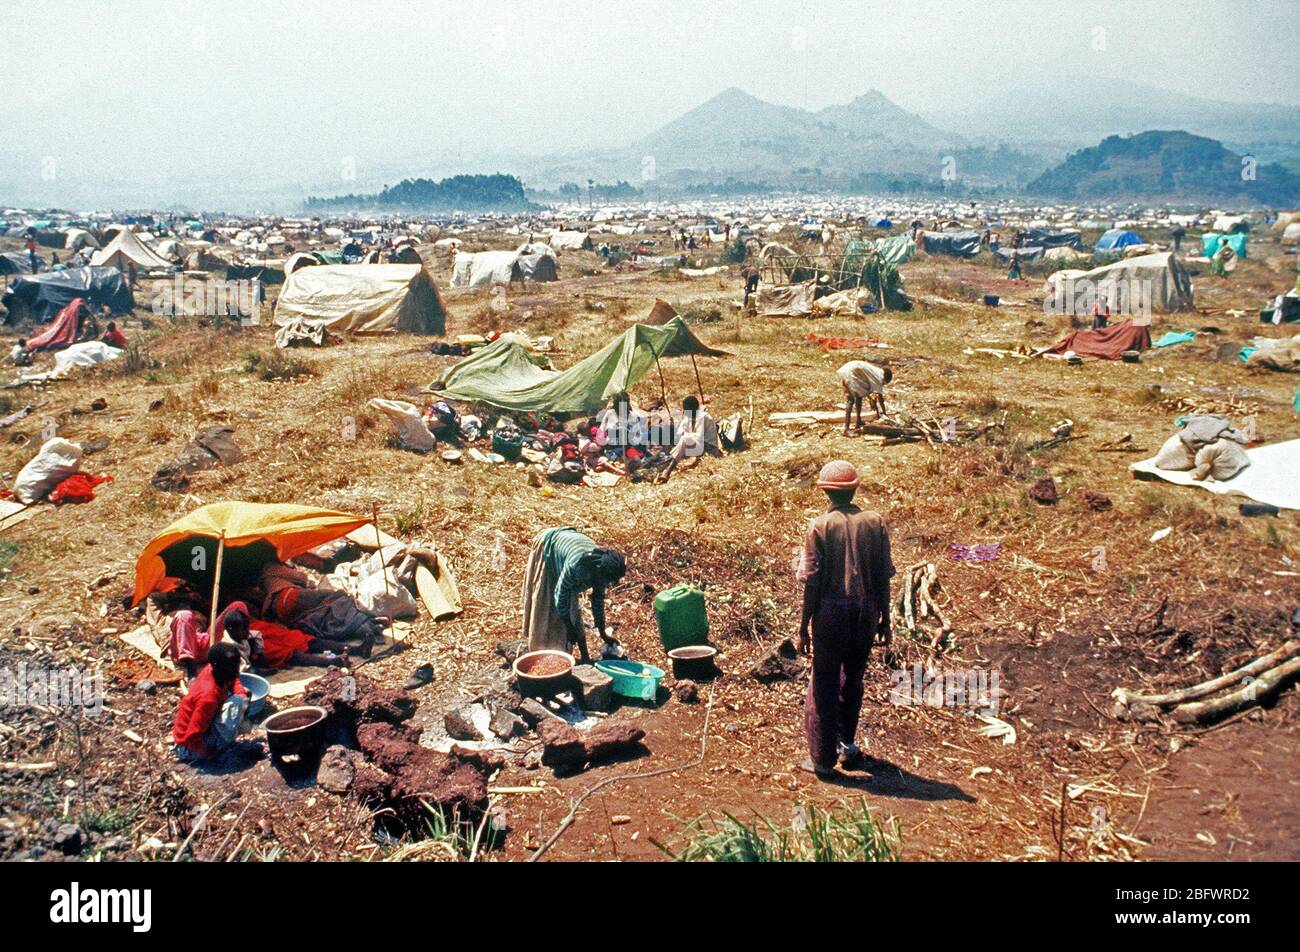 1994 - Shot of the Kibumba refugee camp at Goma, Zaire.  An estimated 1.2 million Rwandan refugees fled to Zaire after a civil war erupted in their country. Stock Photo